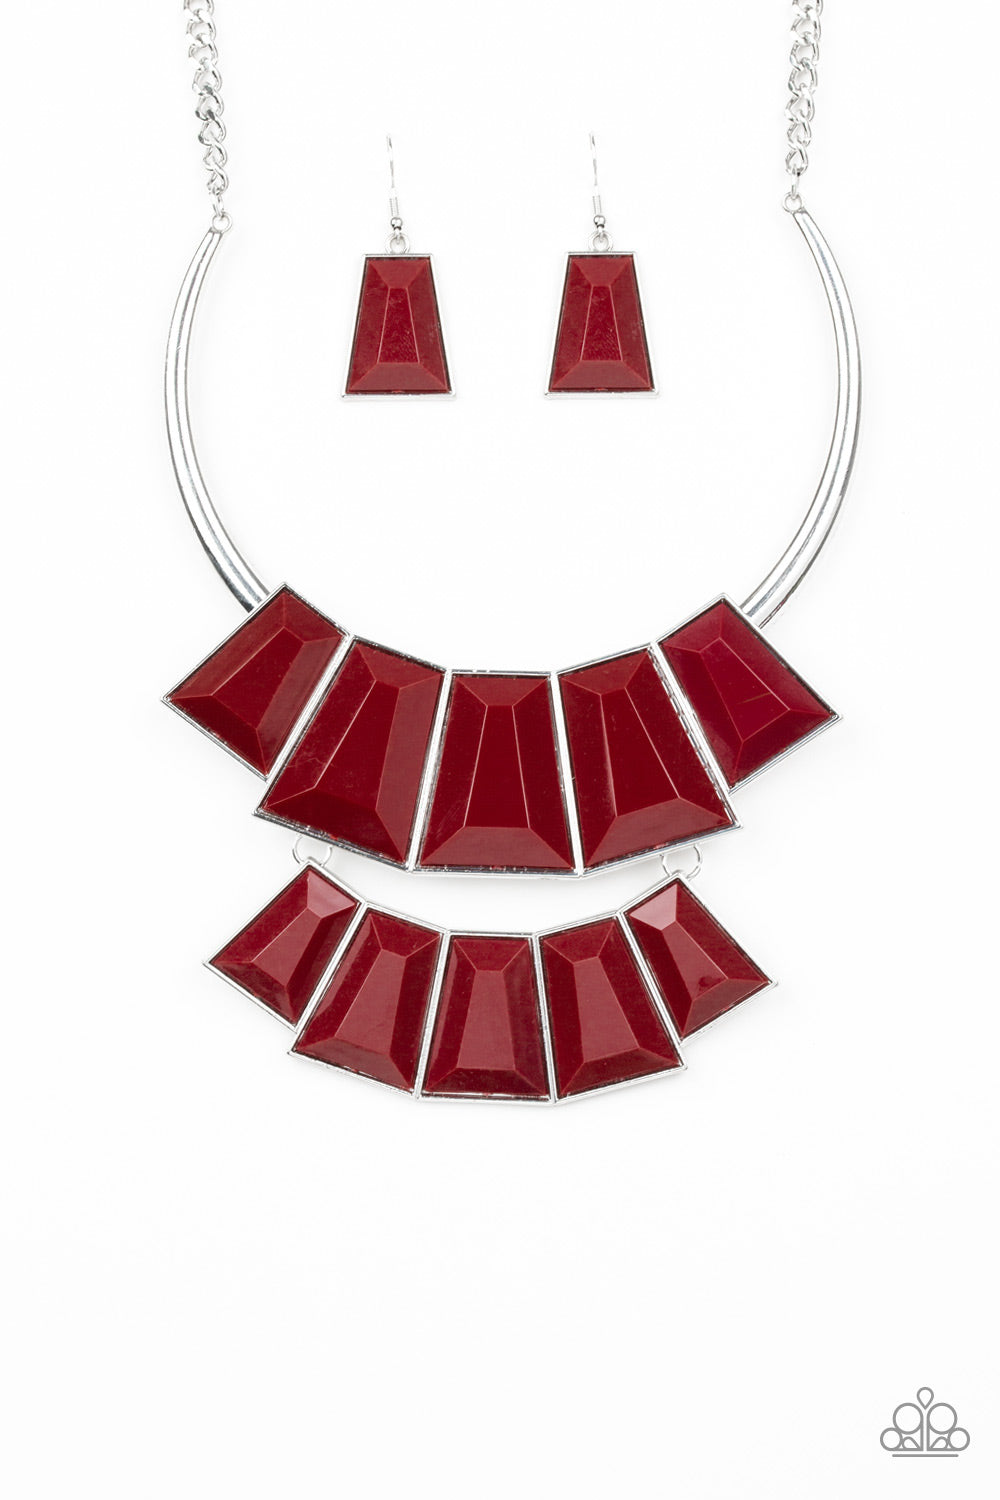 LIONS, TIGRESS, AND BEARS - RED NECKLACE